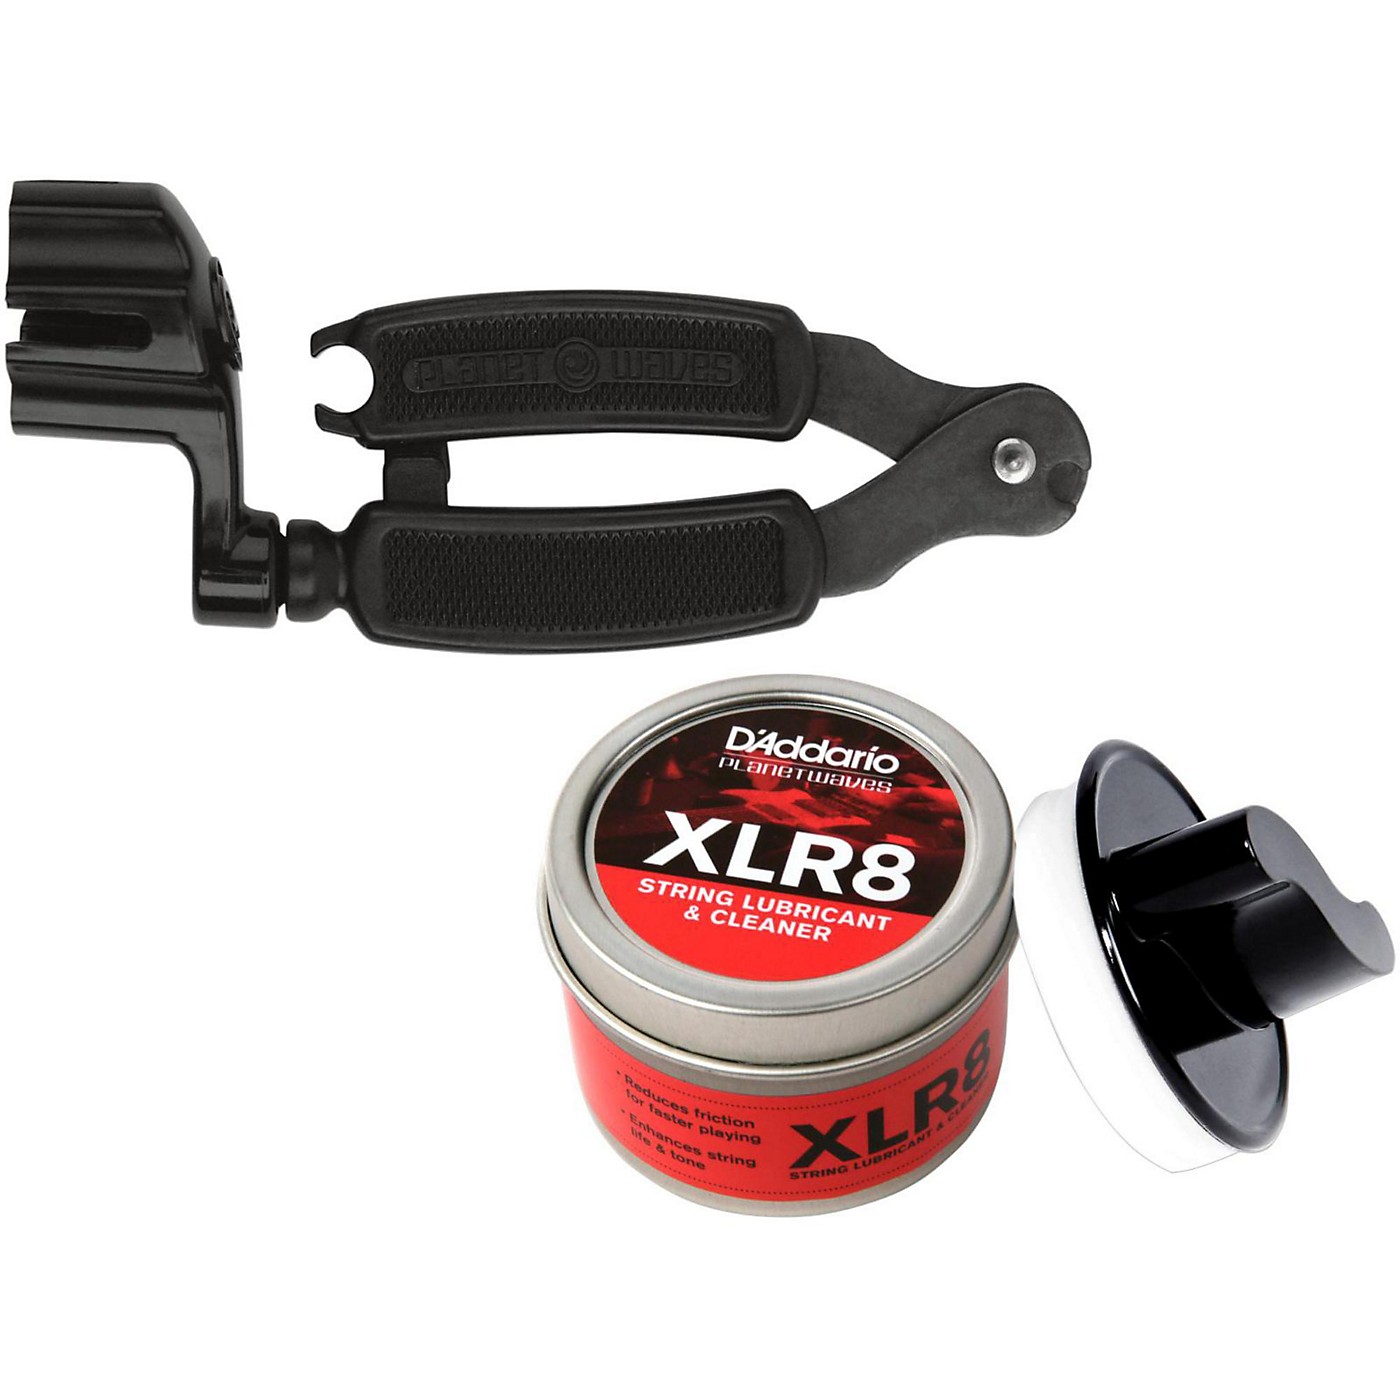 D'Addario Planet Waves Pro-Winder/Cutter & XLR8 String Lubricant/Cleaner Kit thumbnail